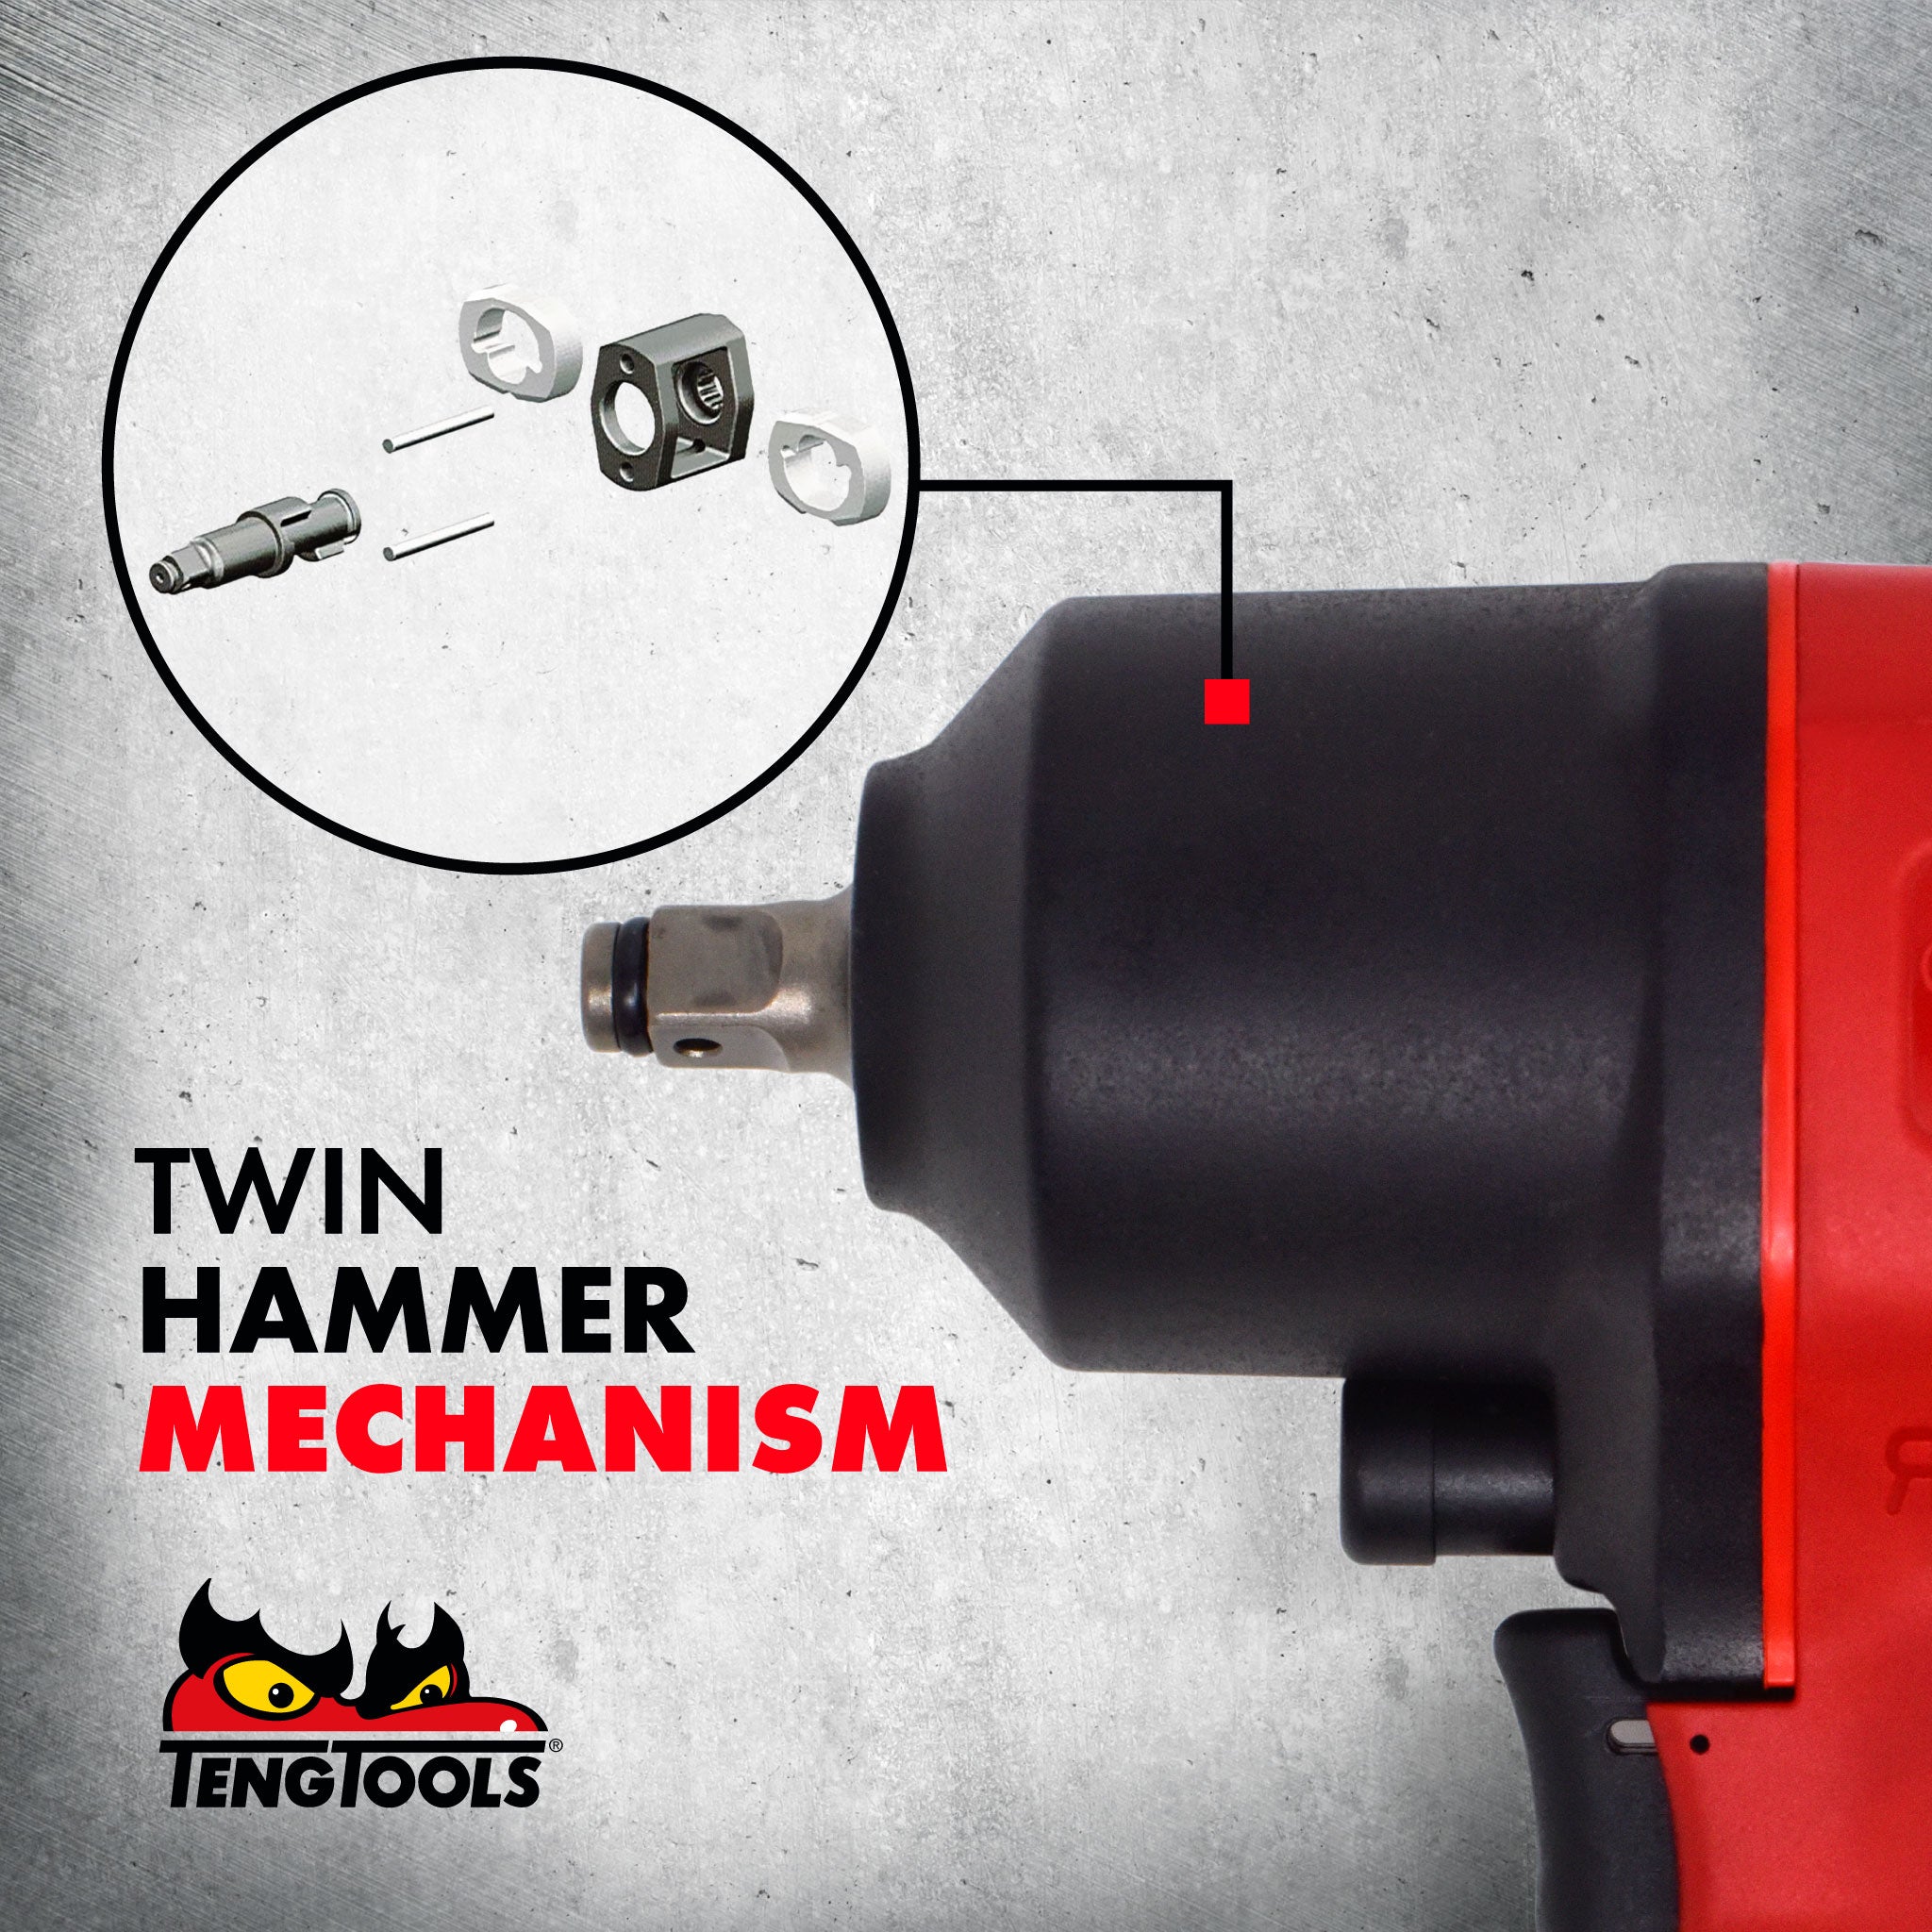 Teng Tools 3/8 Inch Square Drive Reversible High Torque Composite Air Impact Wrench Gun - ARWC38